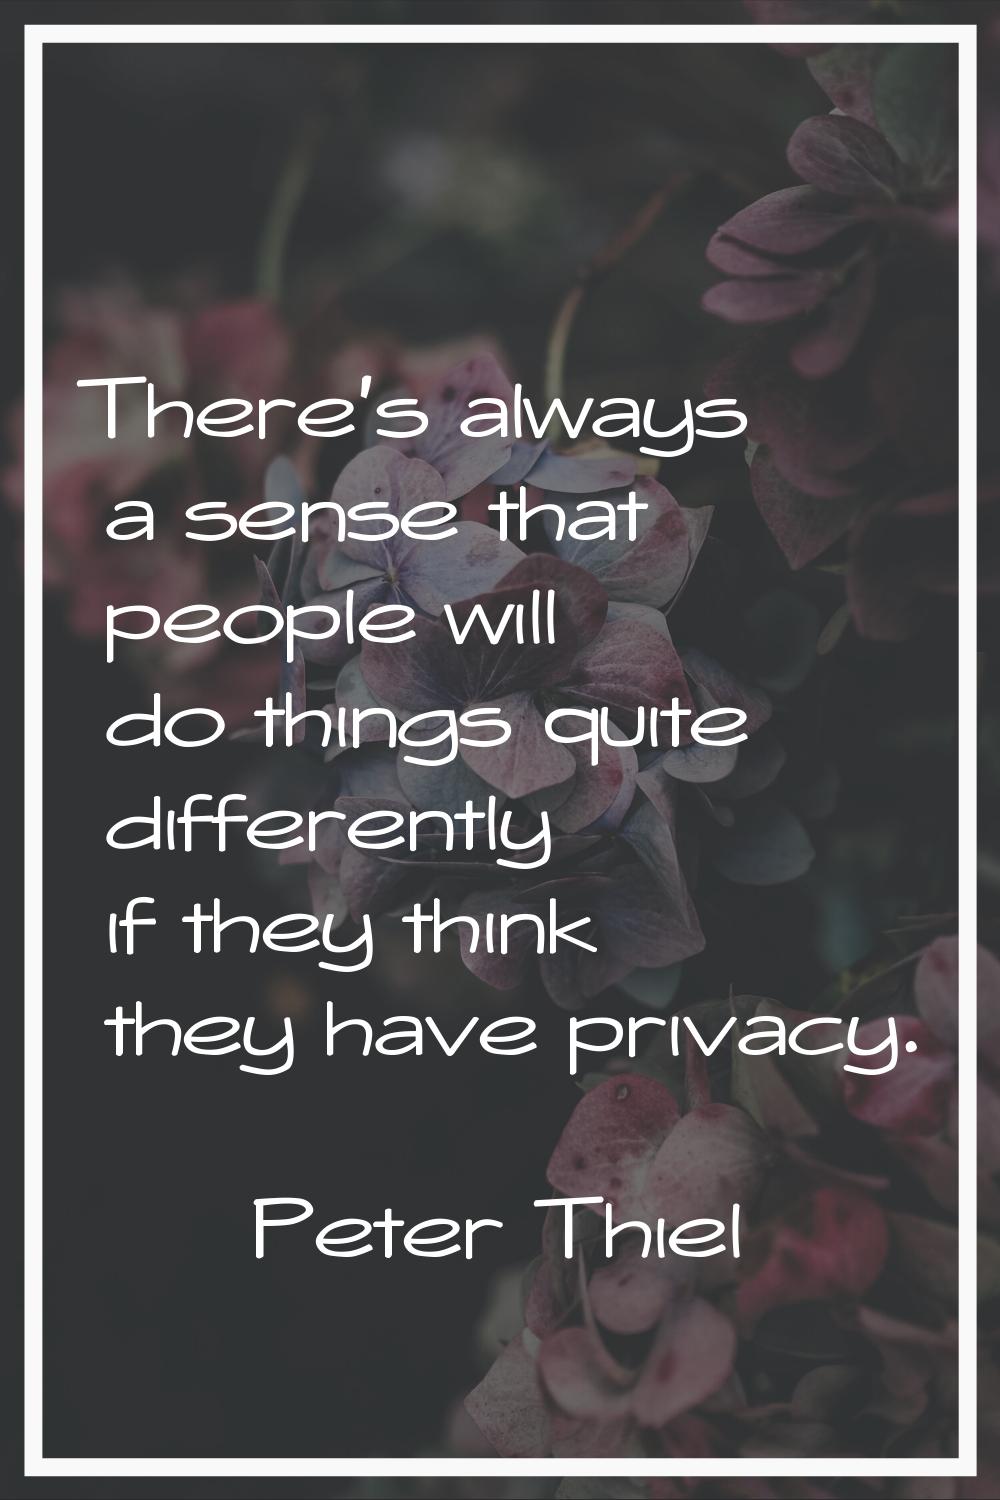 There's always a sense that people will do things quite differently if they think they have privacy